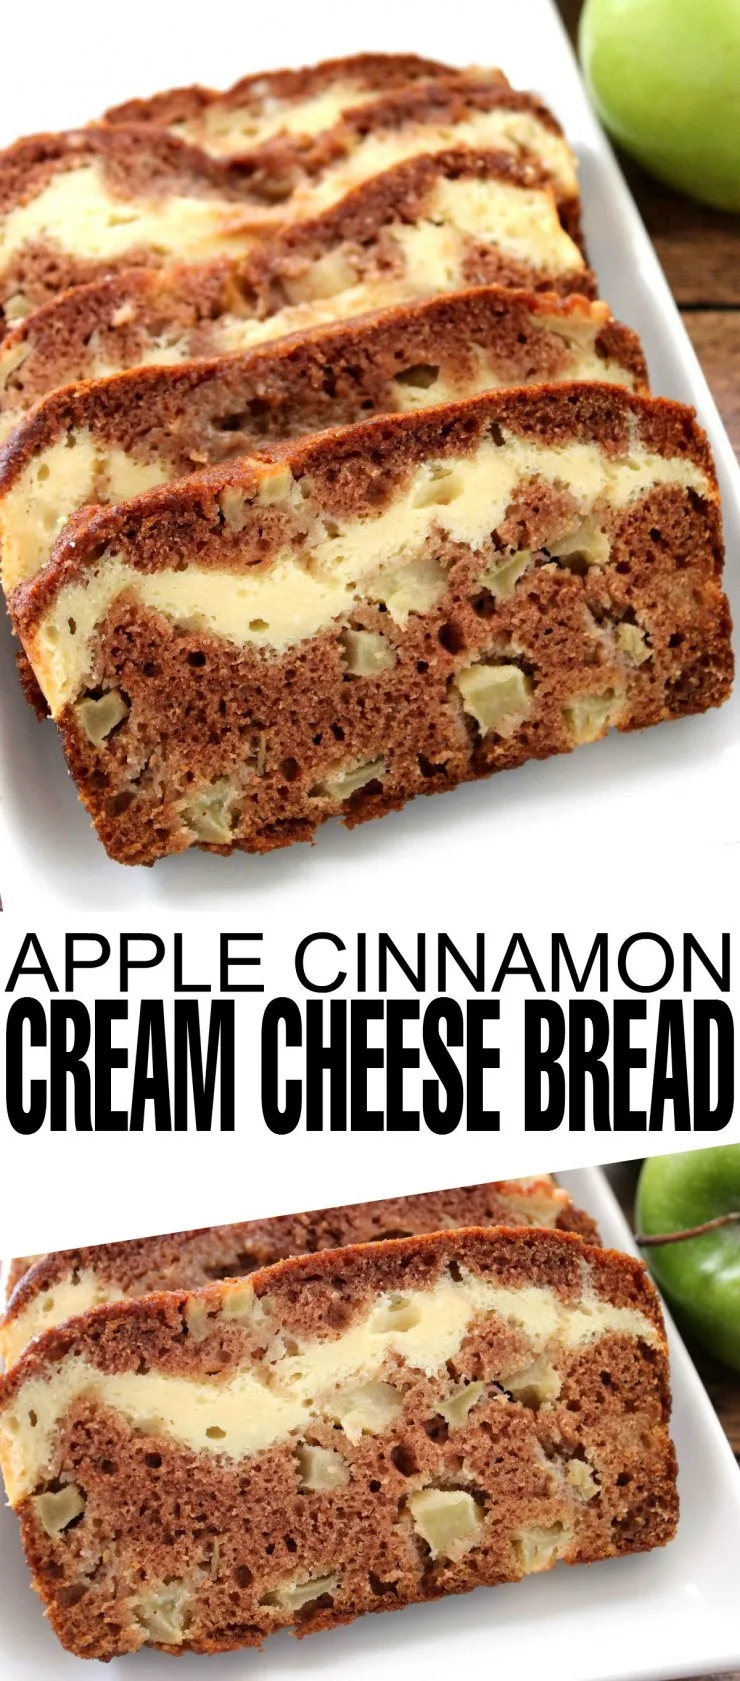 This Apple Cinnamon Cream Cheese Bread is perfect to enjoy with a coffee on a warm autumn day!